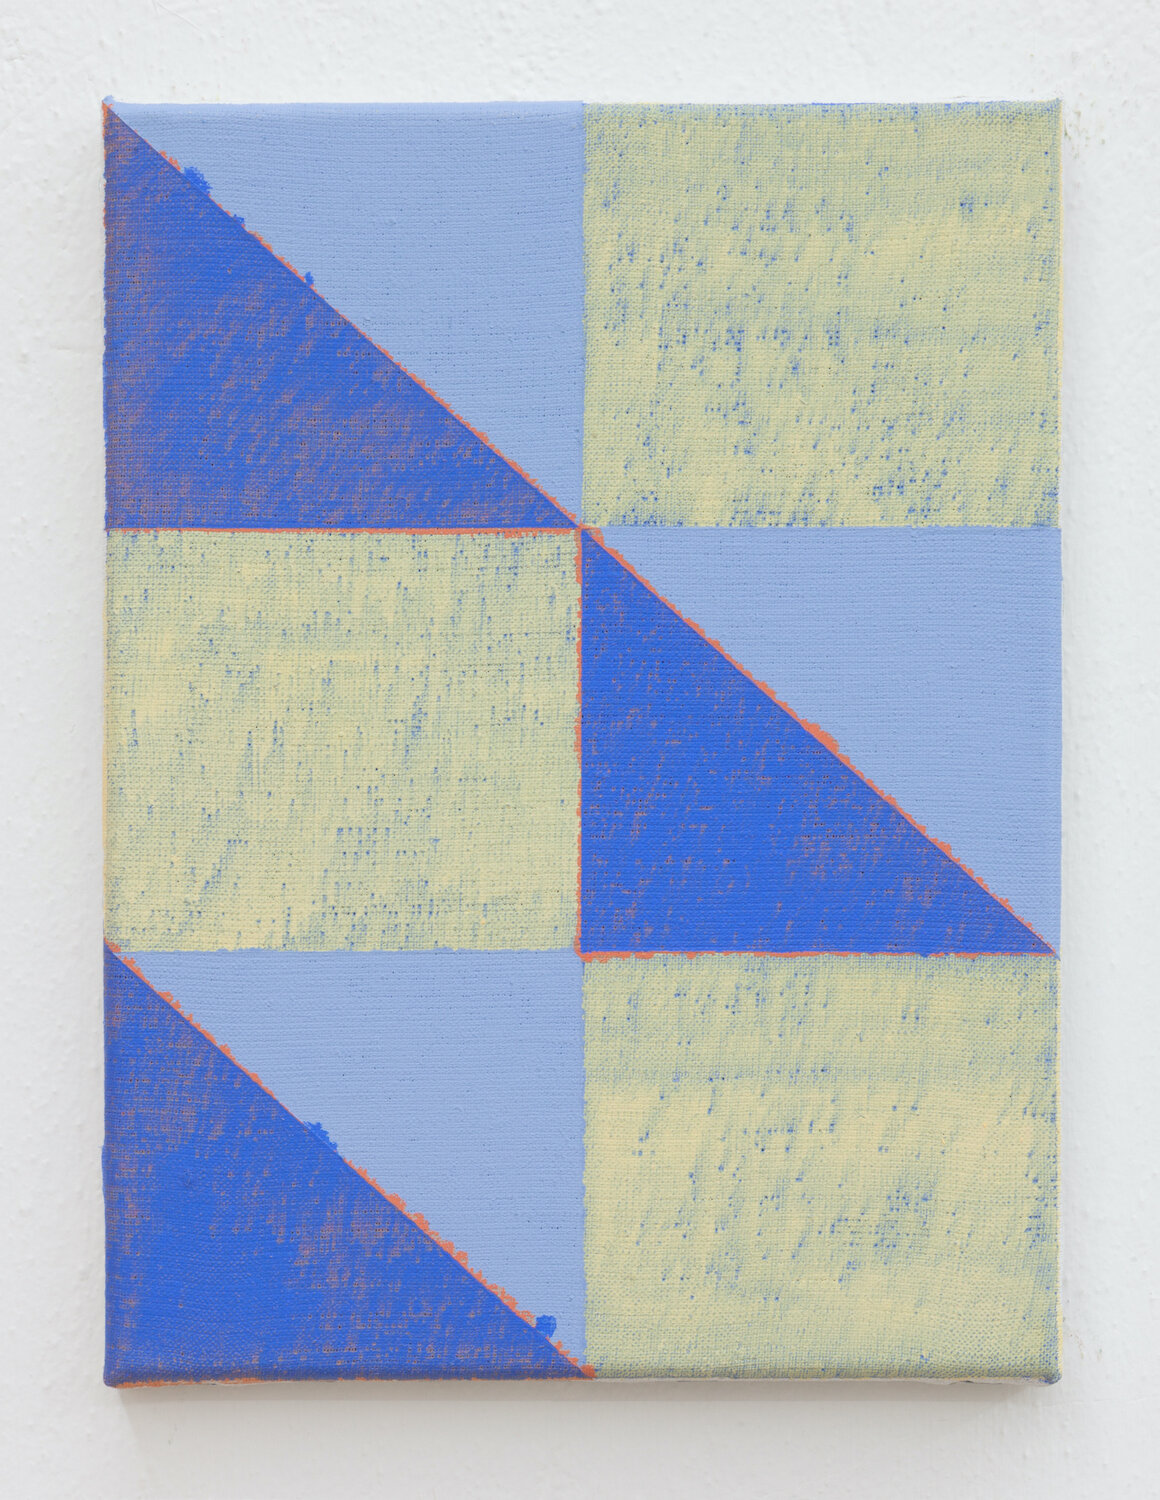  Joshua Abelow,  Untitled (Abstraction “HJJ”) , 2019, Oil on linen, 12 x 9 inches 